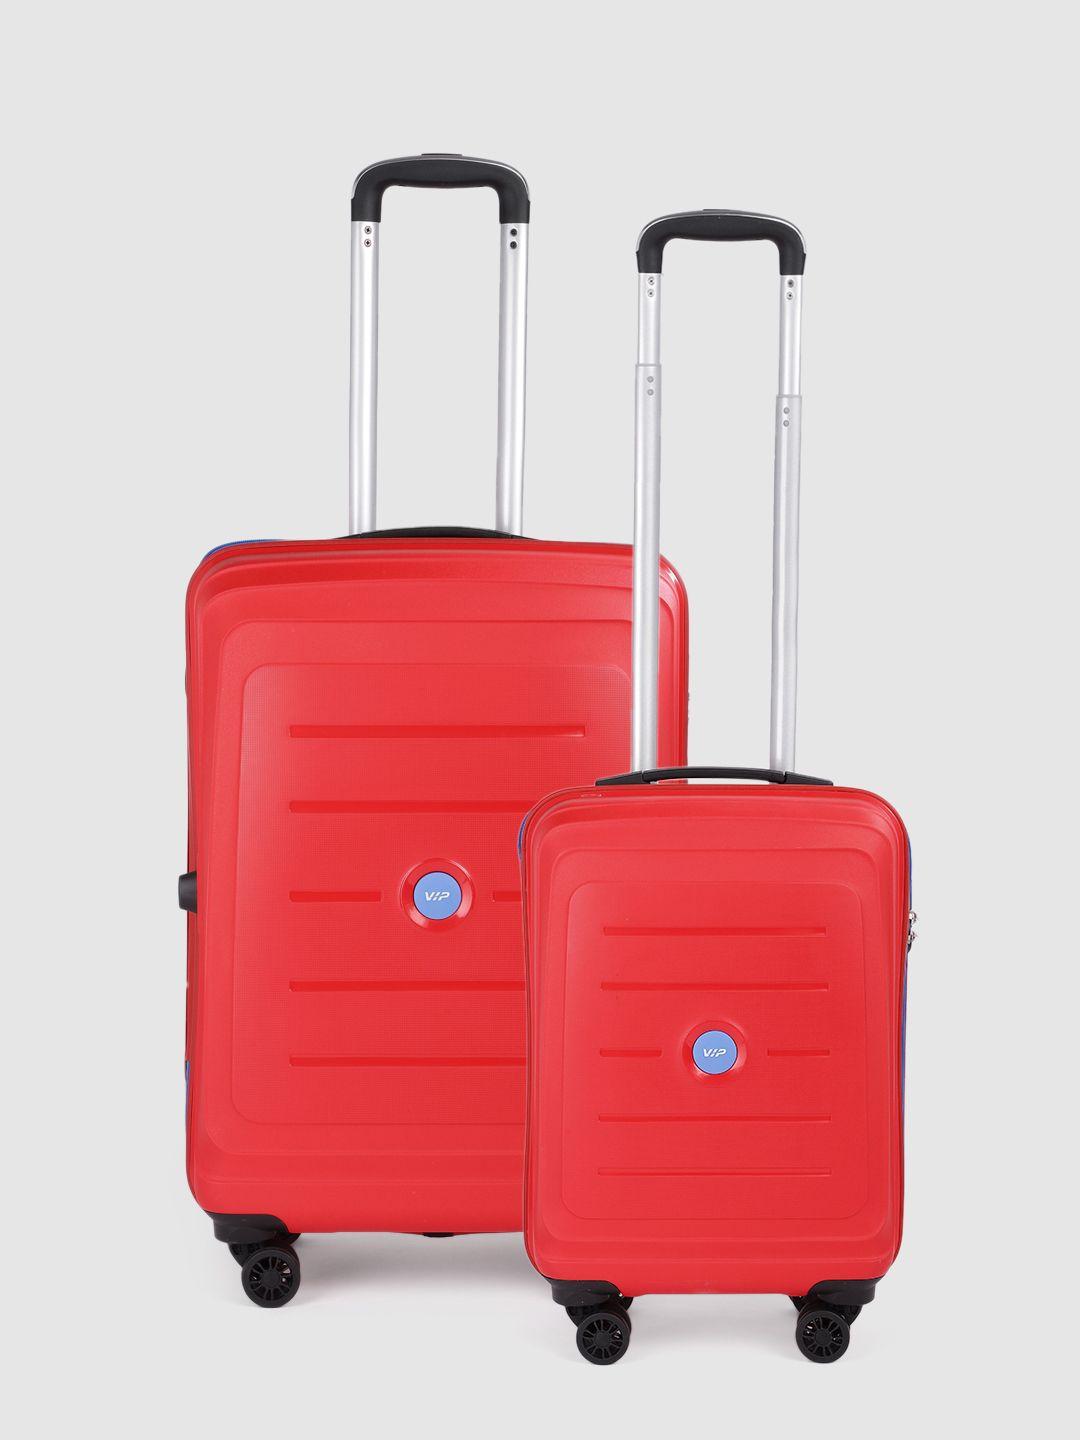 vip corsa set of 2 hard textured trolley suitcases - cabin and medium